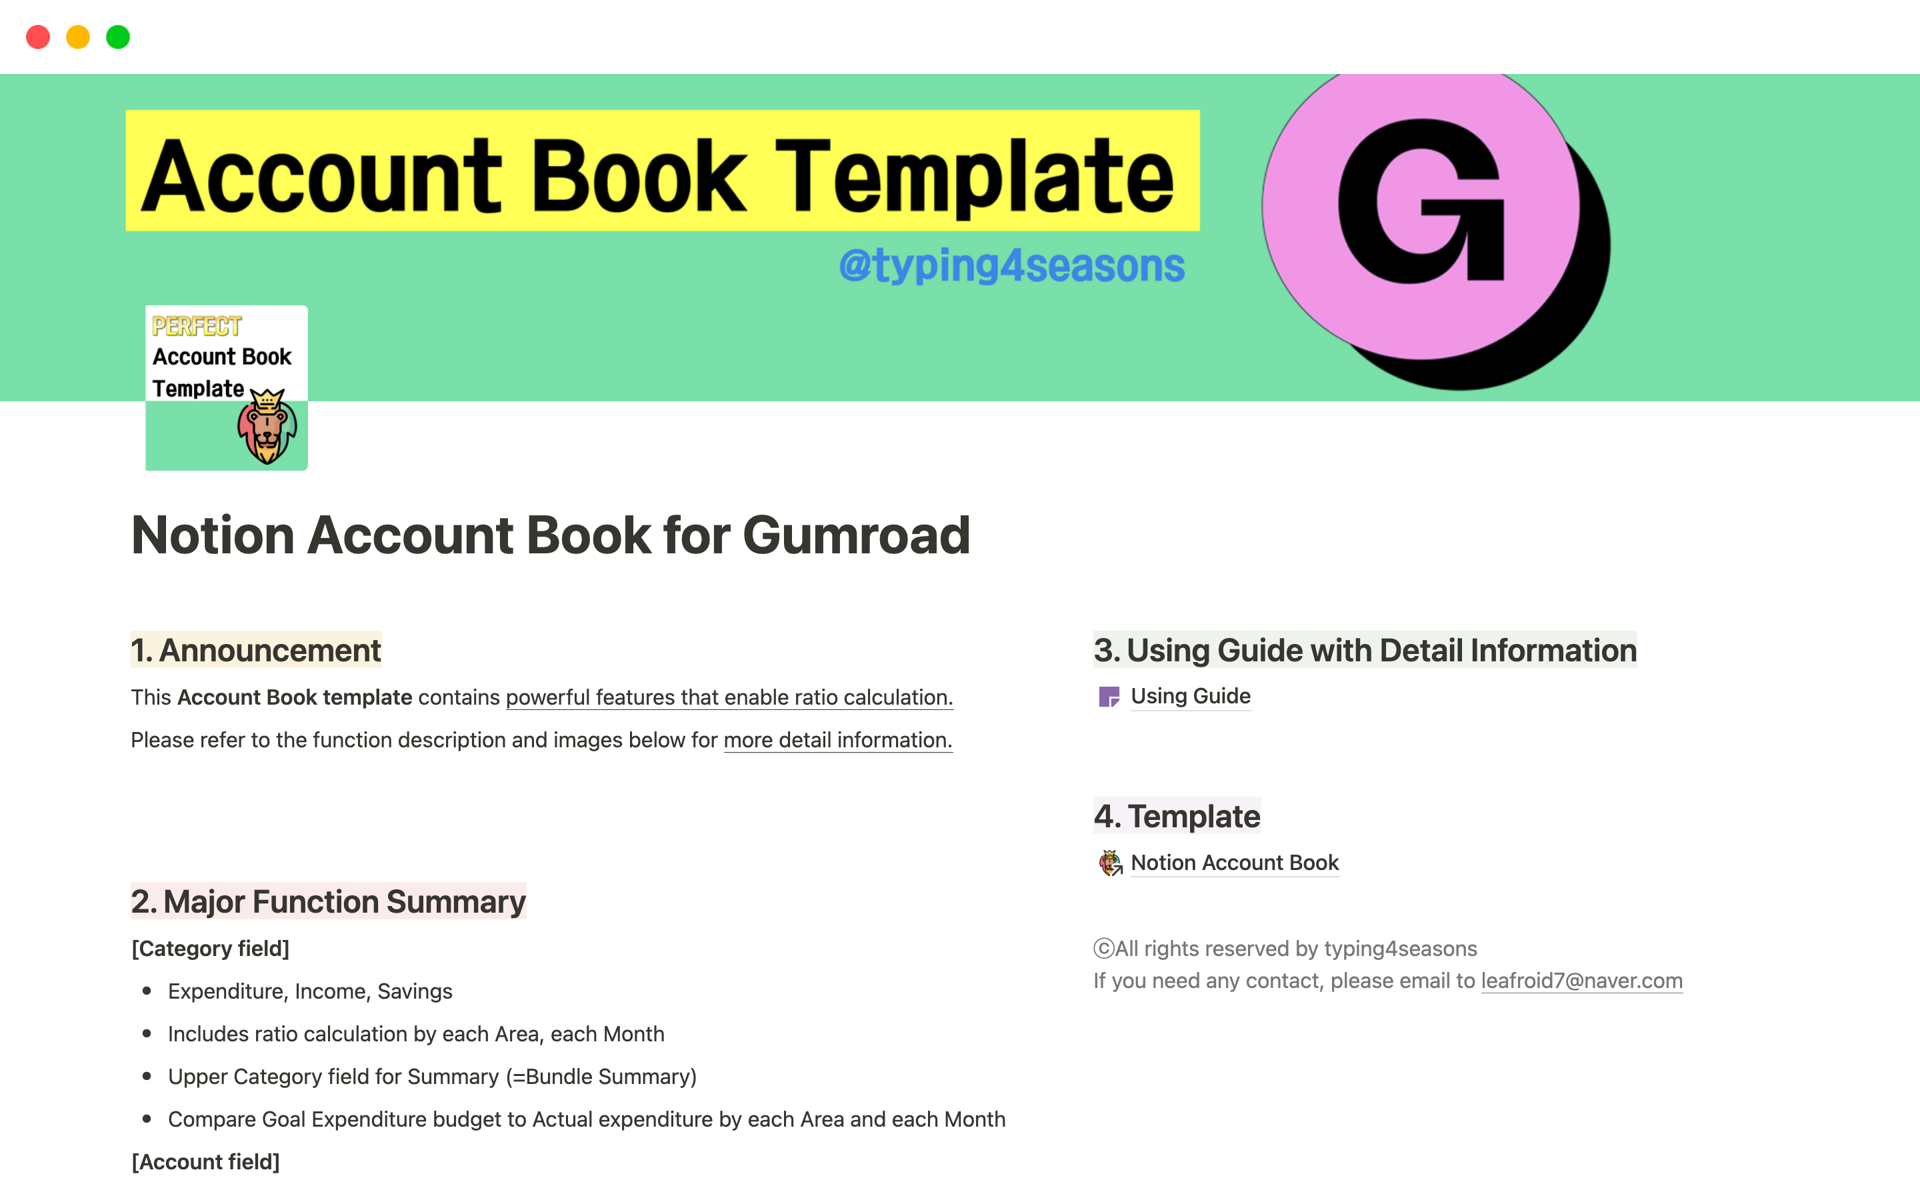 This Account Book template contains powerful features that enable ratio calculation.